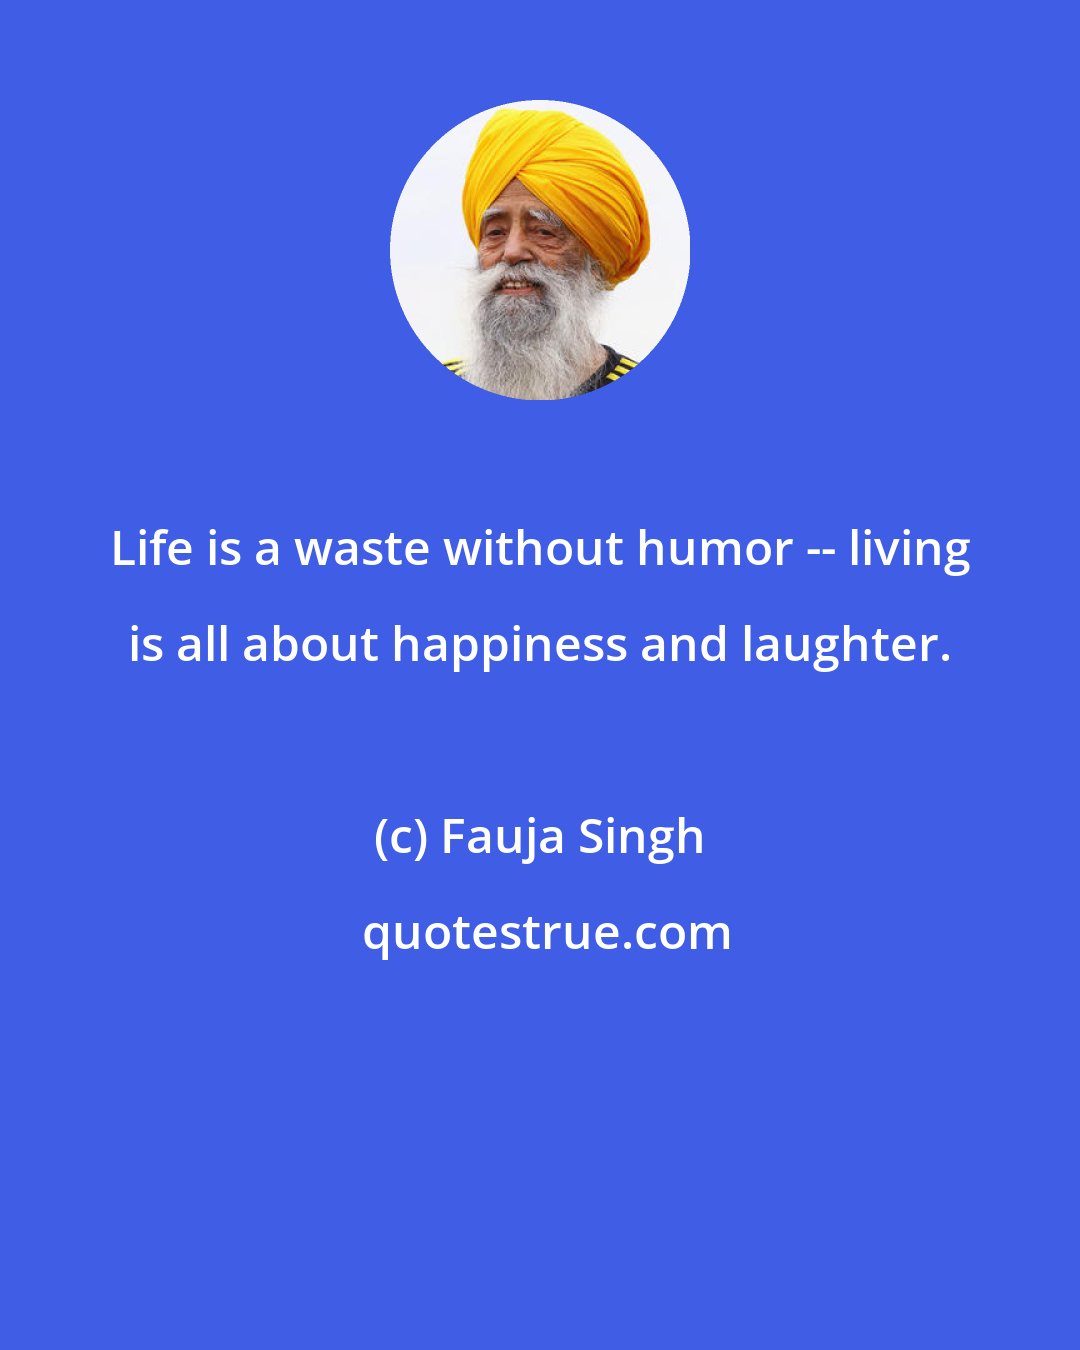 Fauja Singh: Life is a waste without humor -- living is all about happiness and laughter.